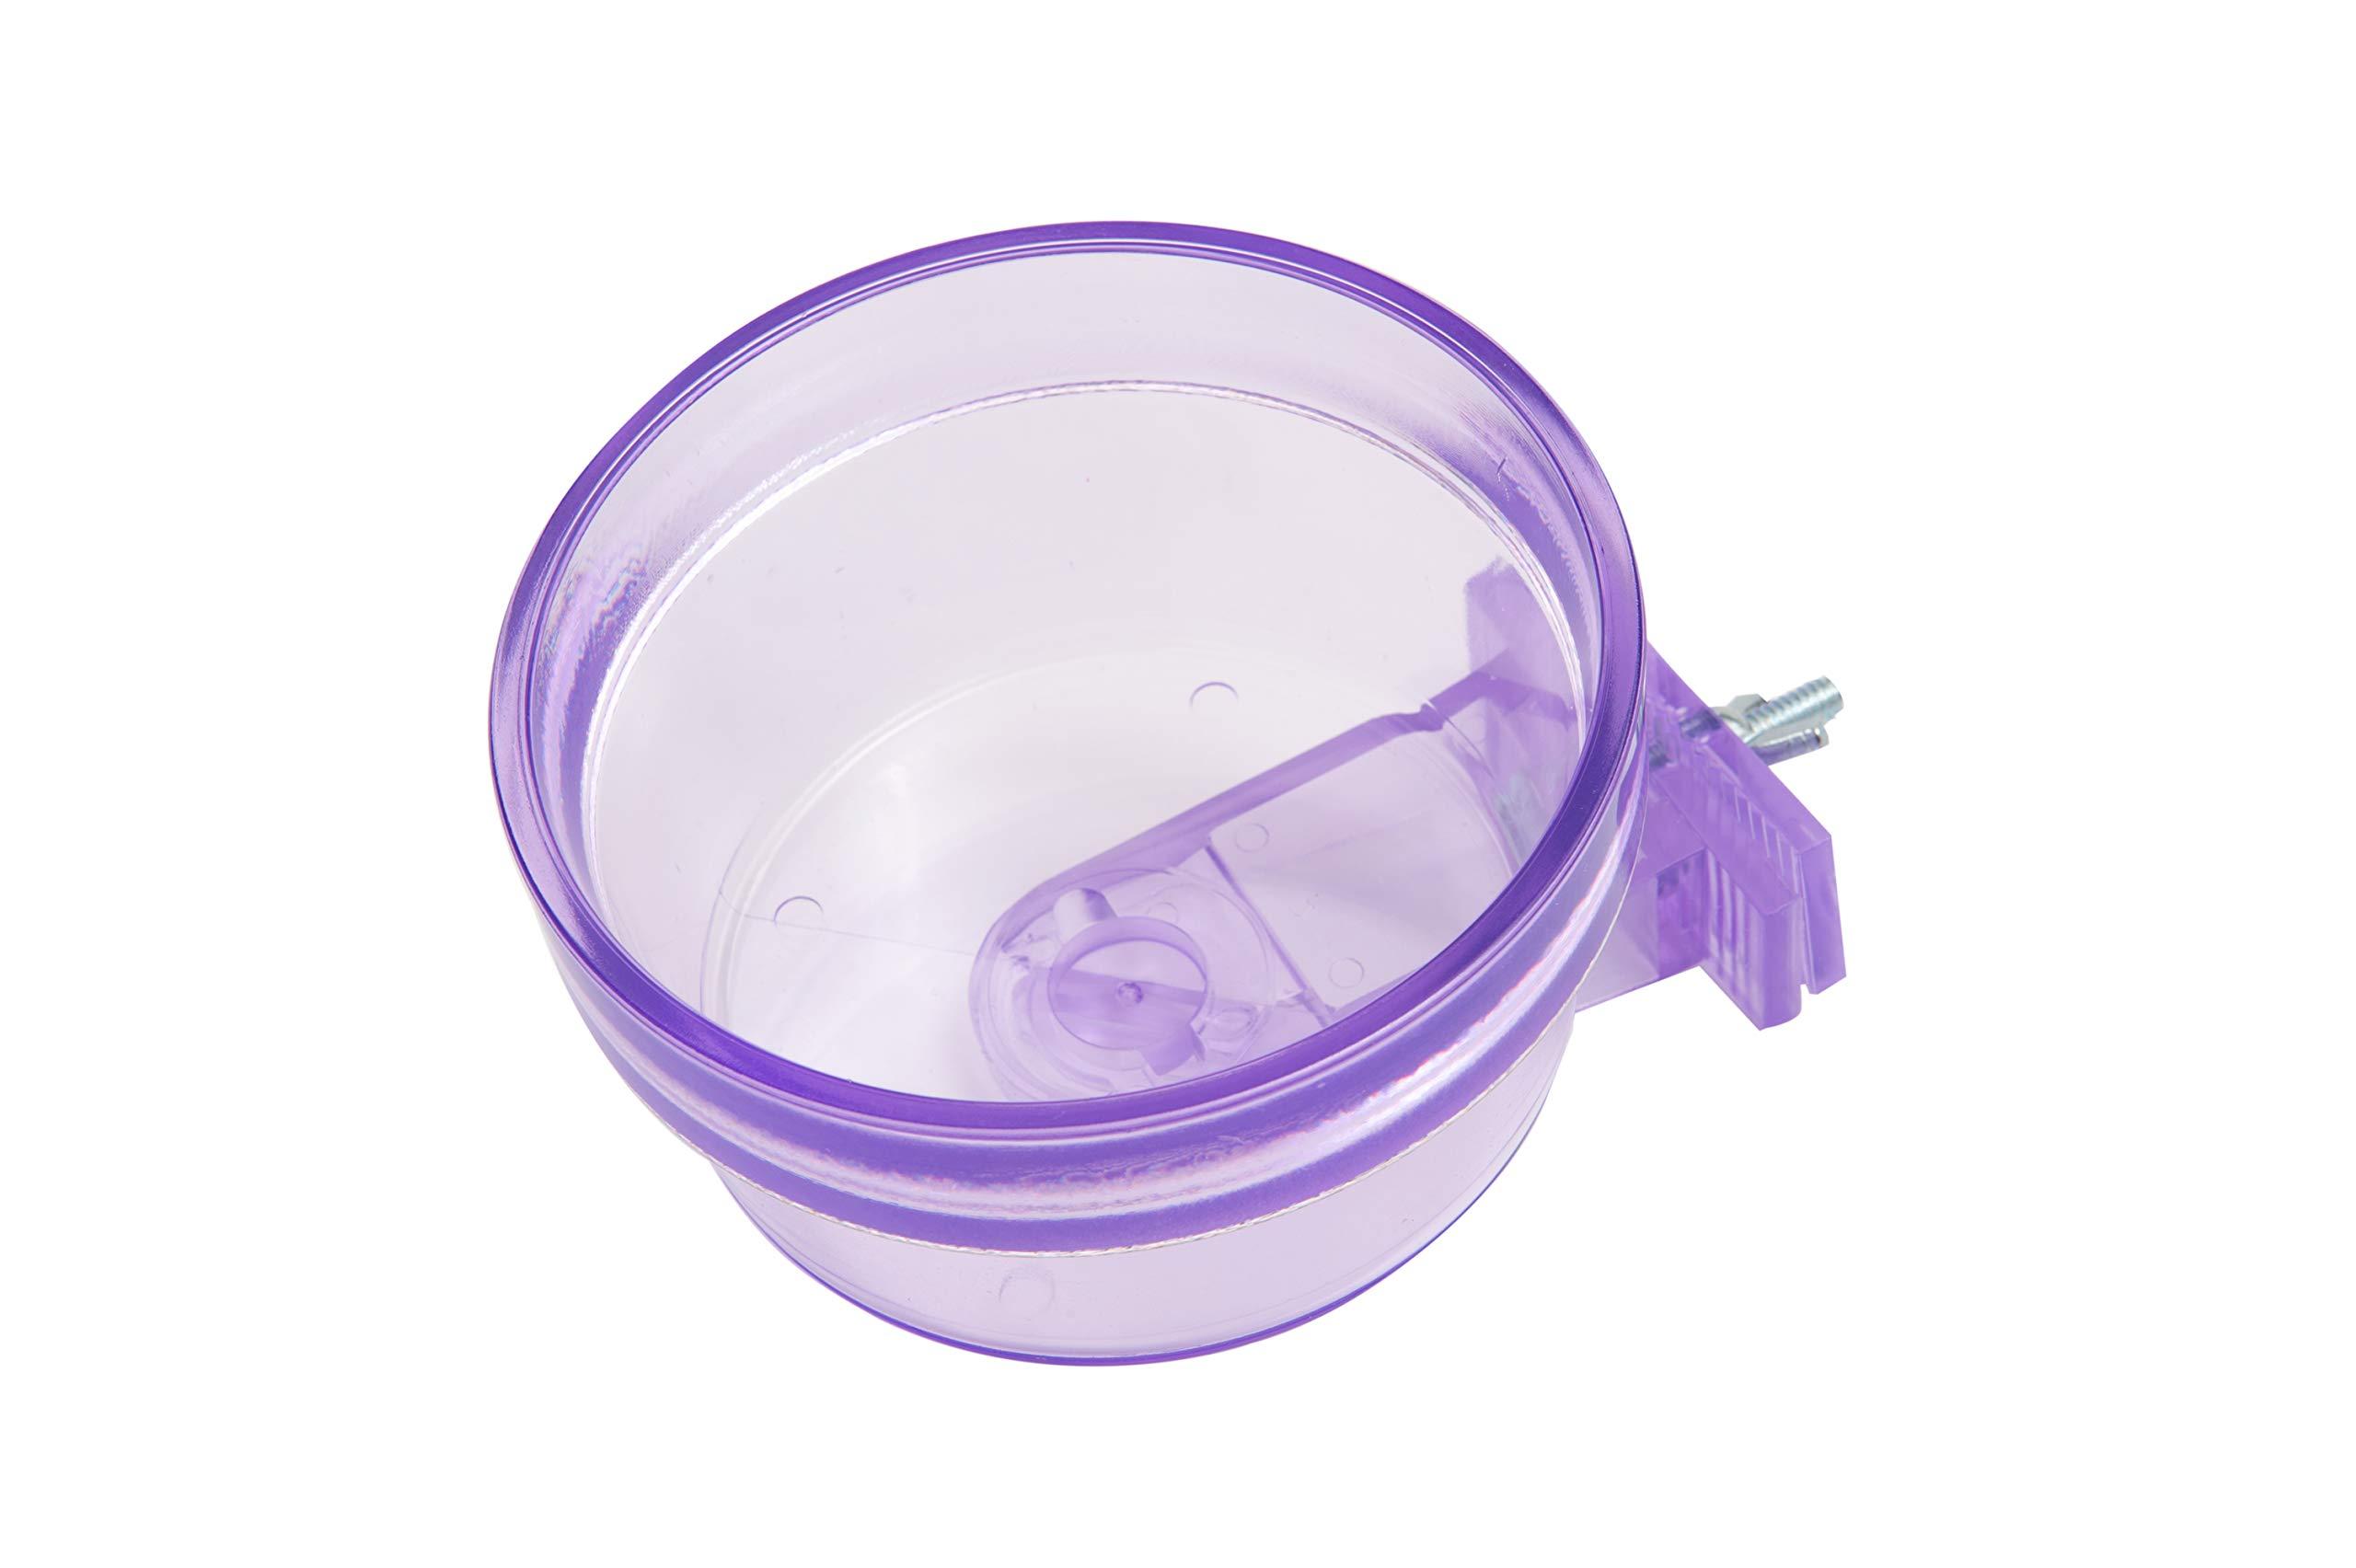 Lixit Quick Lock Cage Bowls for Small Animals and Birds. (20oz, Purple)